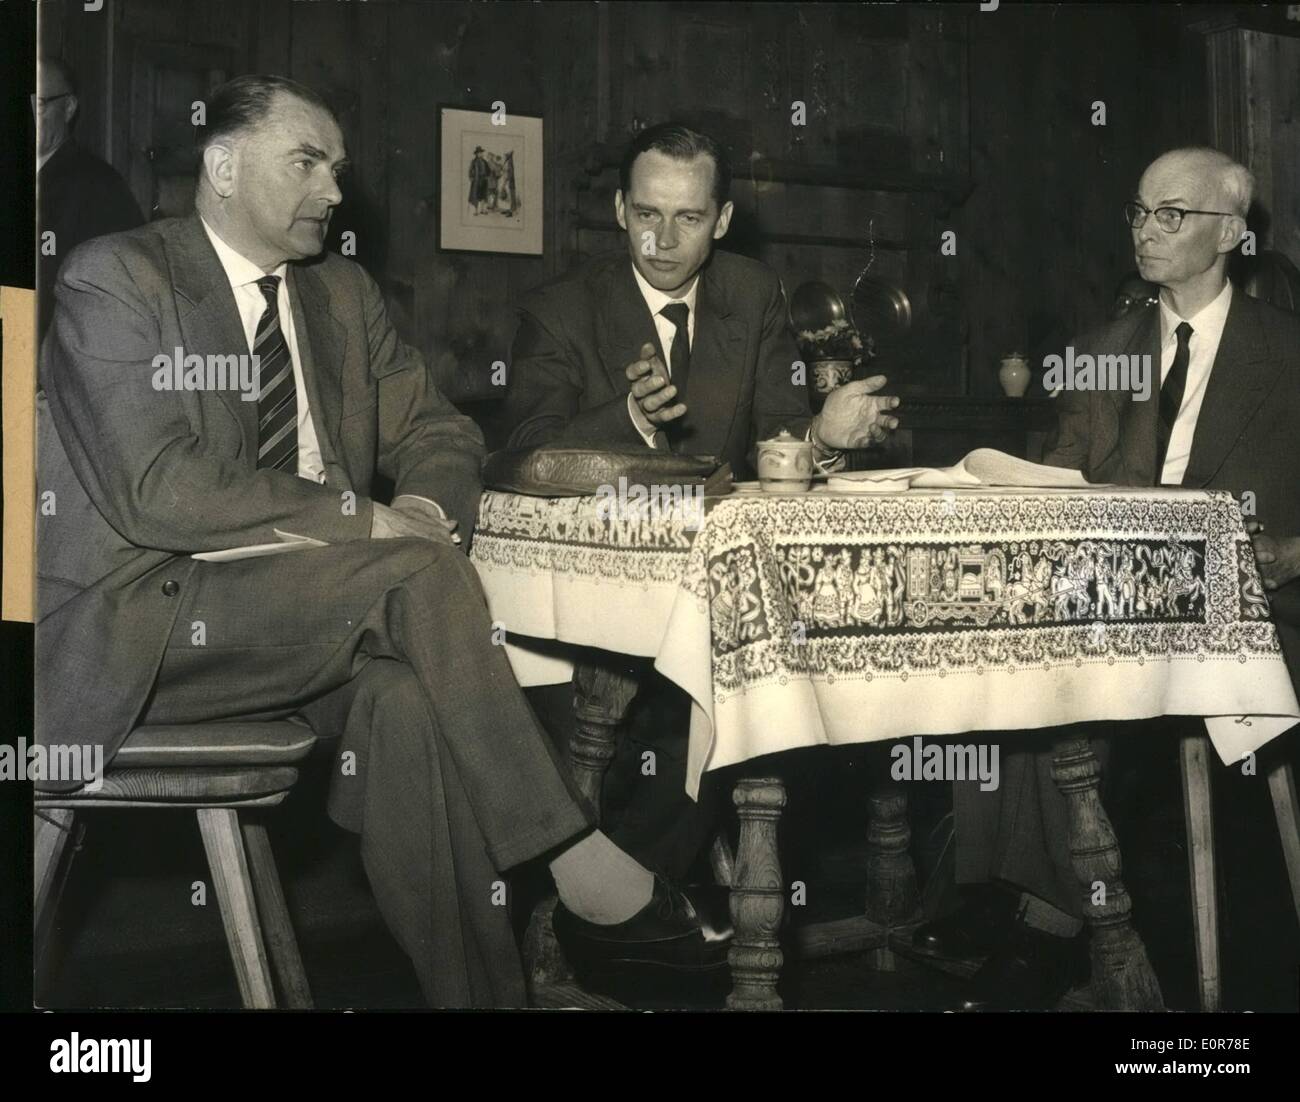 May 05, 1958 - the commissioner for investigation from the Munich Airport Crash has adjourned session: The Official communique from the two and a half day session on Munich airport says: The condition of the investigation does not admit syllogism, that the cause of the crash now were known.Photo Shows Three members of the Commission during the press conference f.l.t.r.: Mr. Hans J. Reichel (Hans J. Reichel) an authority of the Bundesamt Fur Luffahrt, the Chief of Commission judge W. Stimpel (W. Stimpel) and an other expert Prof. Georg Bock (Georg Bock) Stock Photo